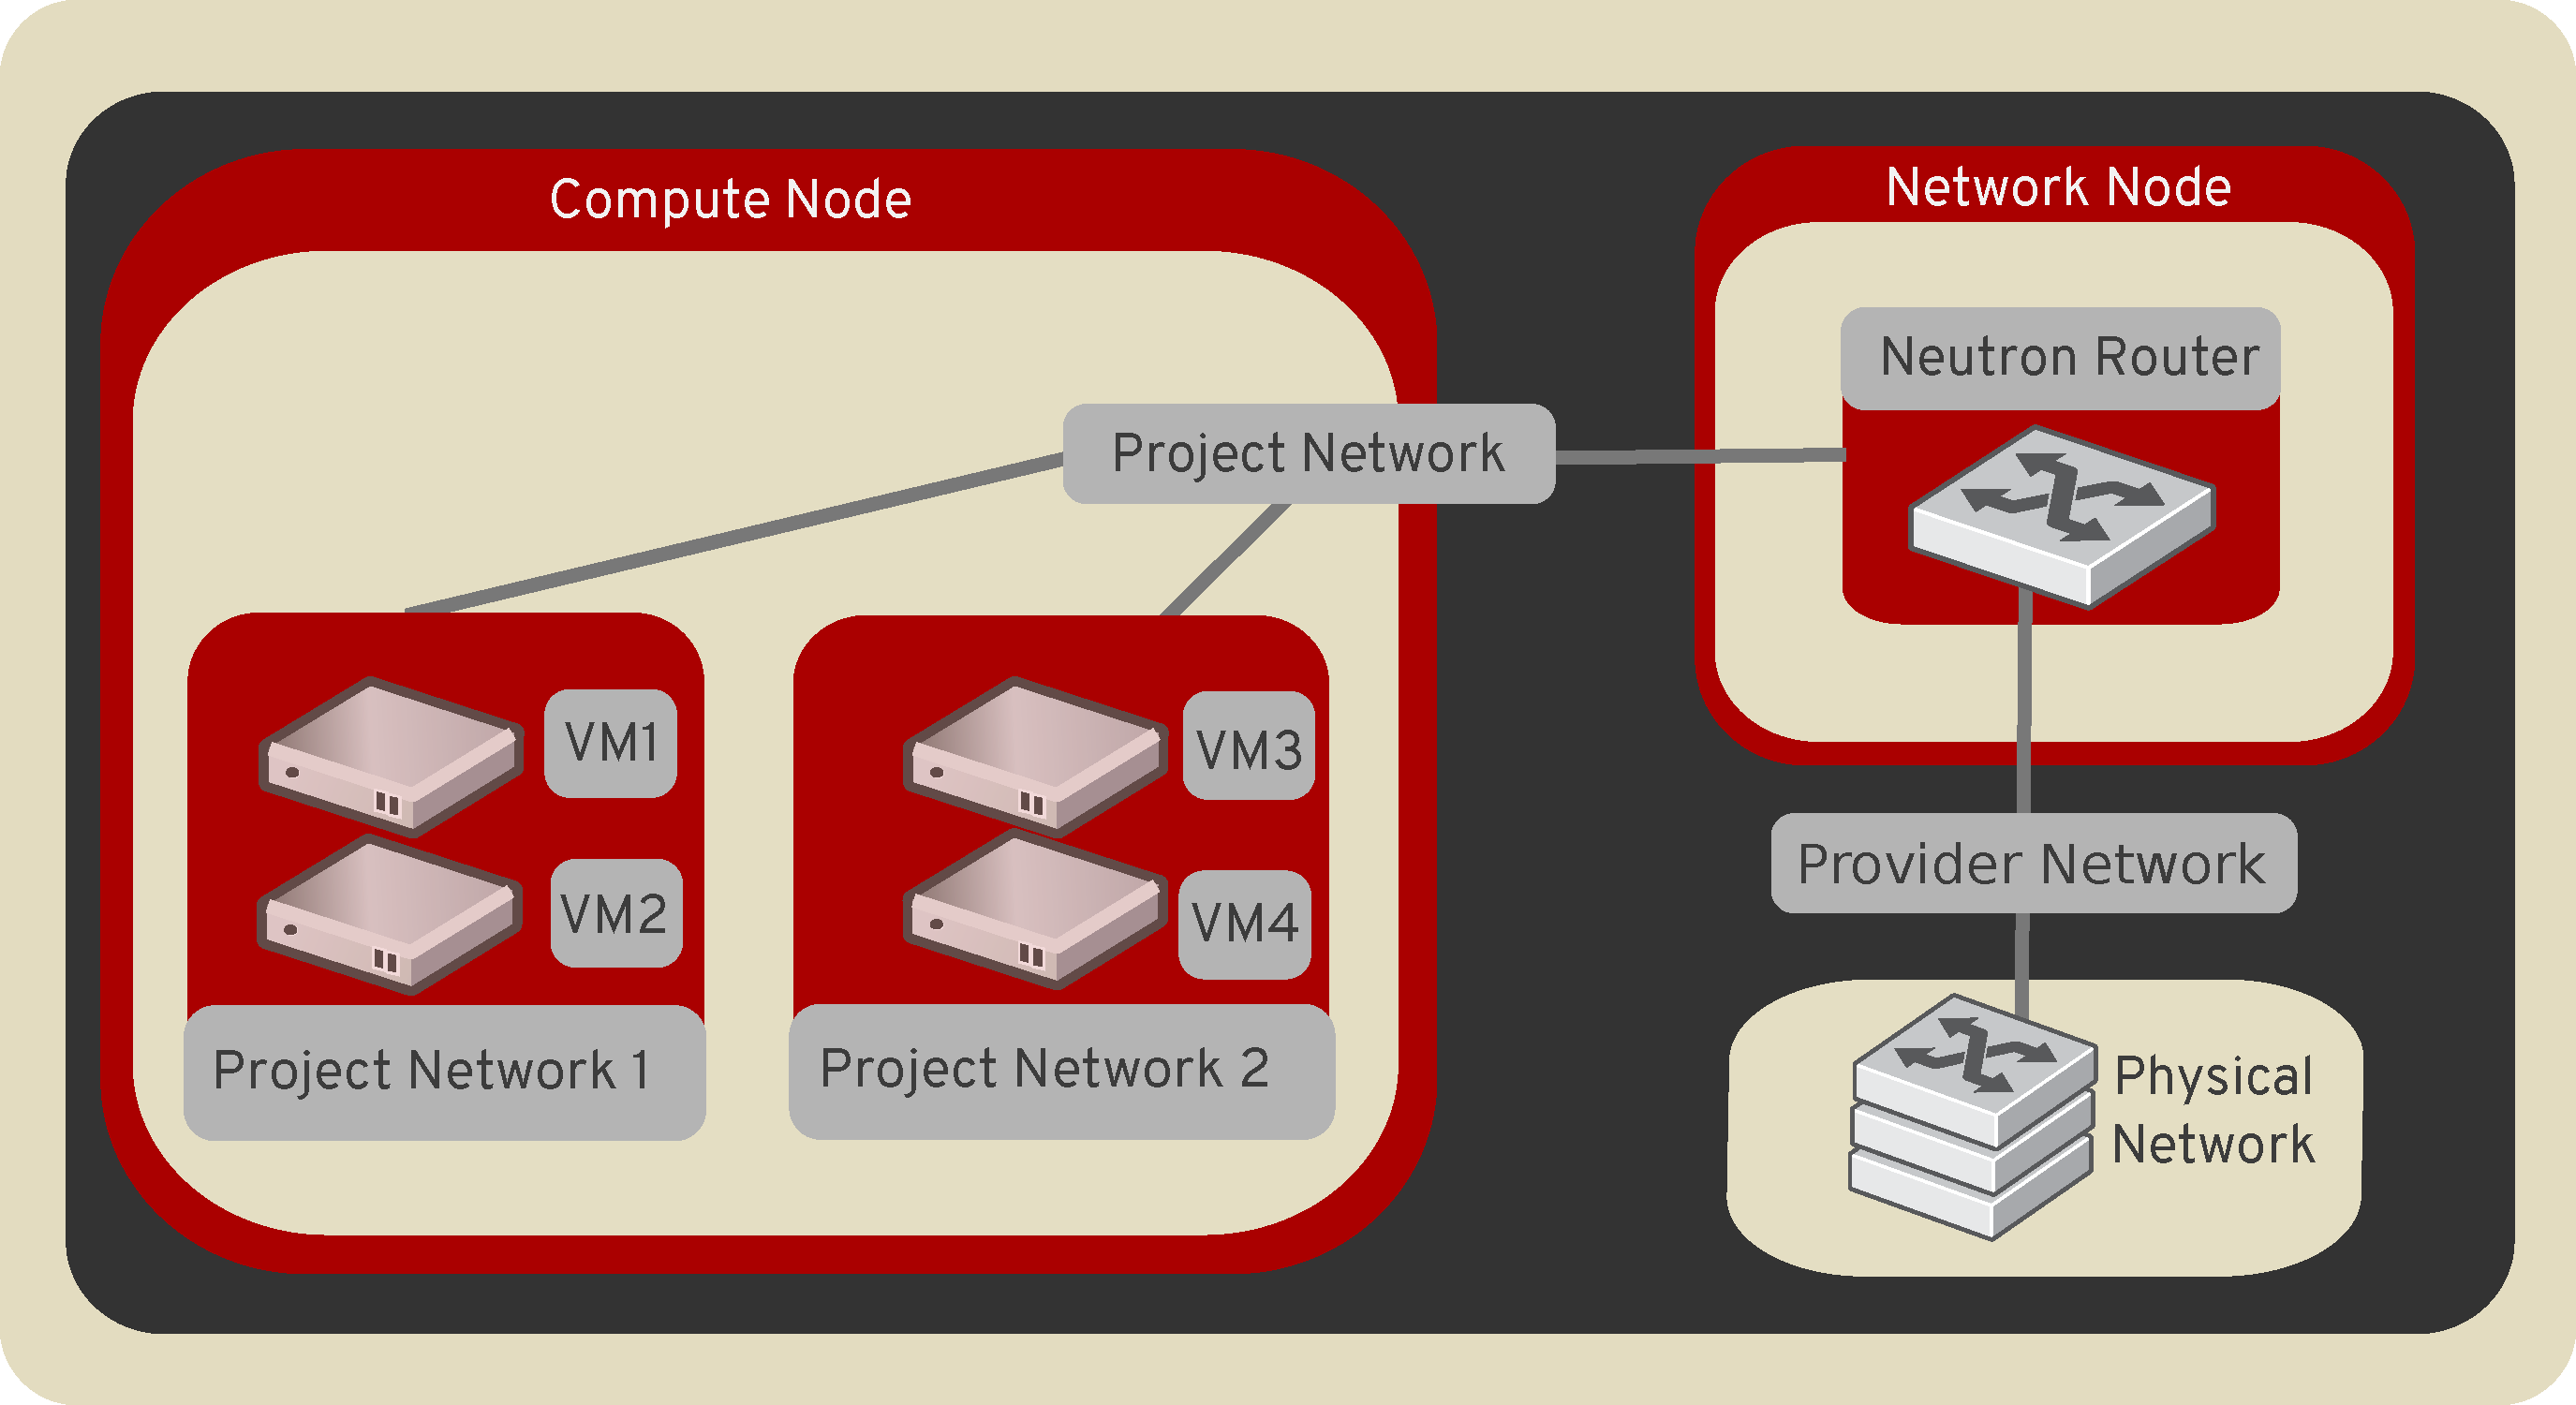 Project and provider networks